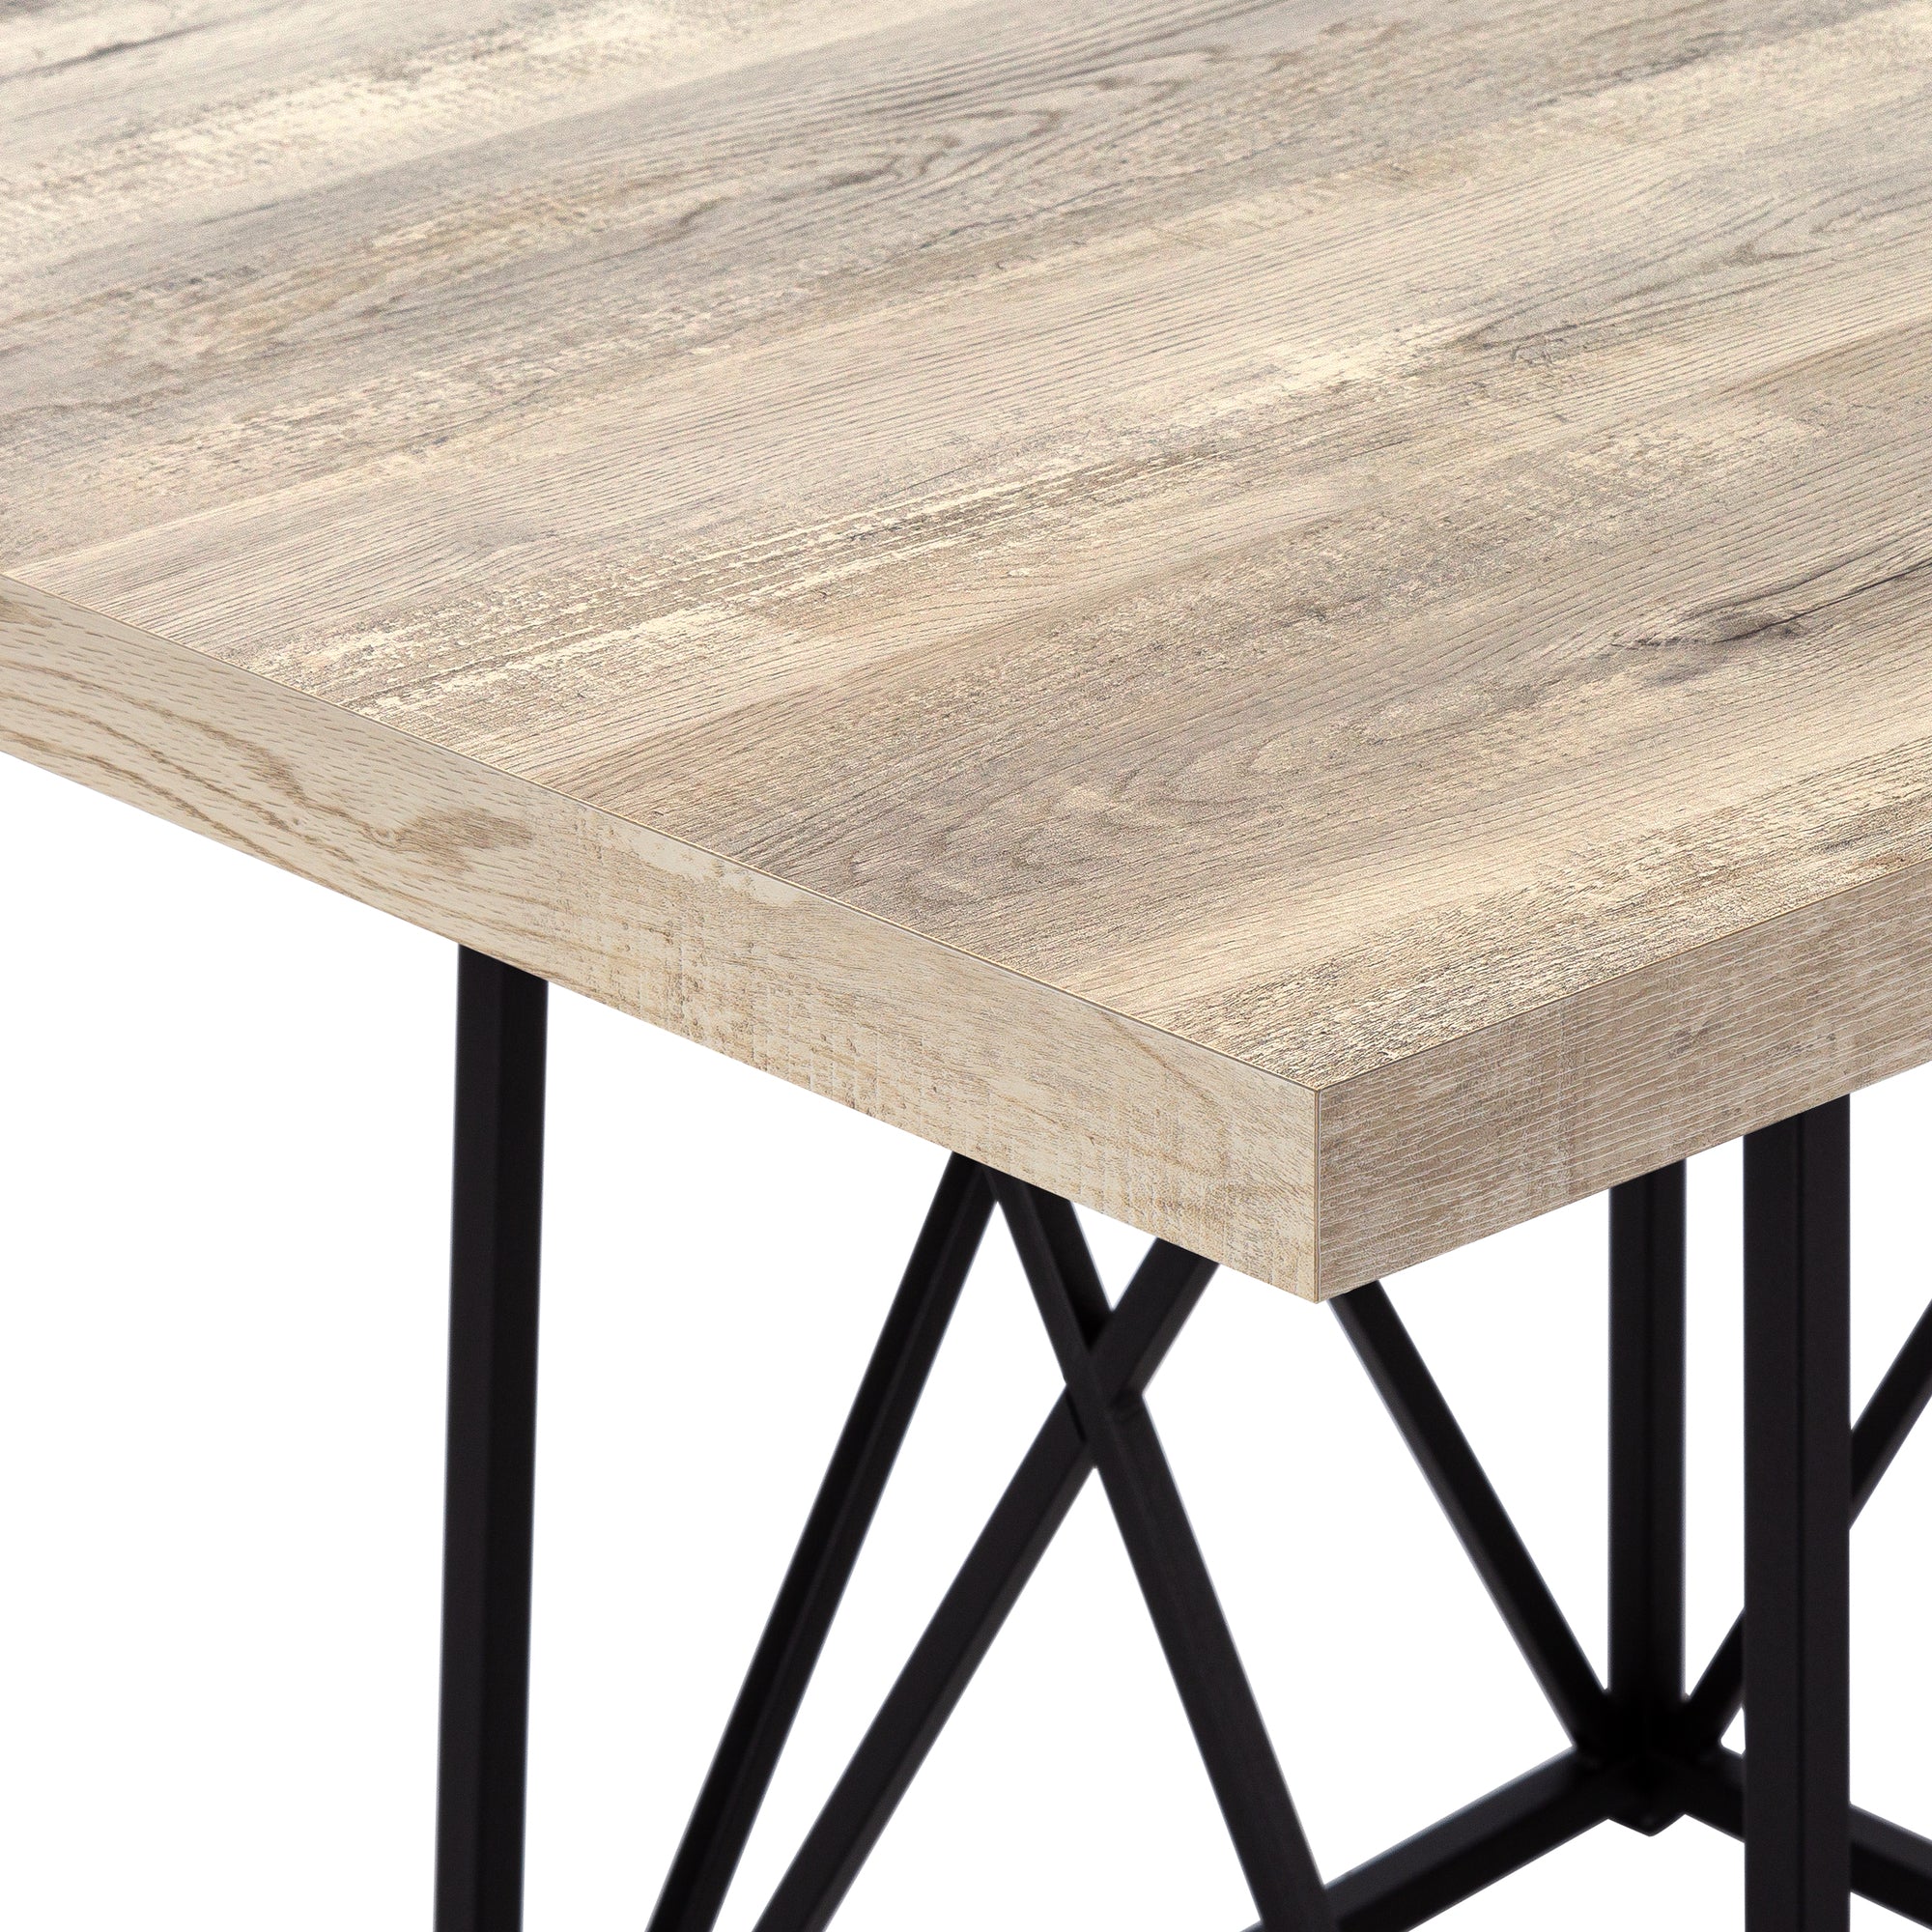 Industrial Style Reclaimed Wood-Look Square Dining Table (Taupe)